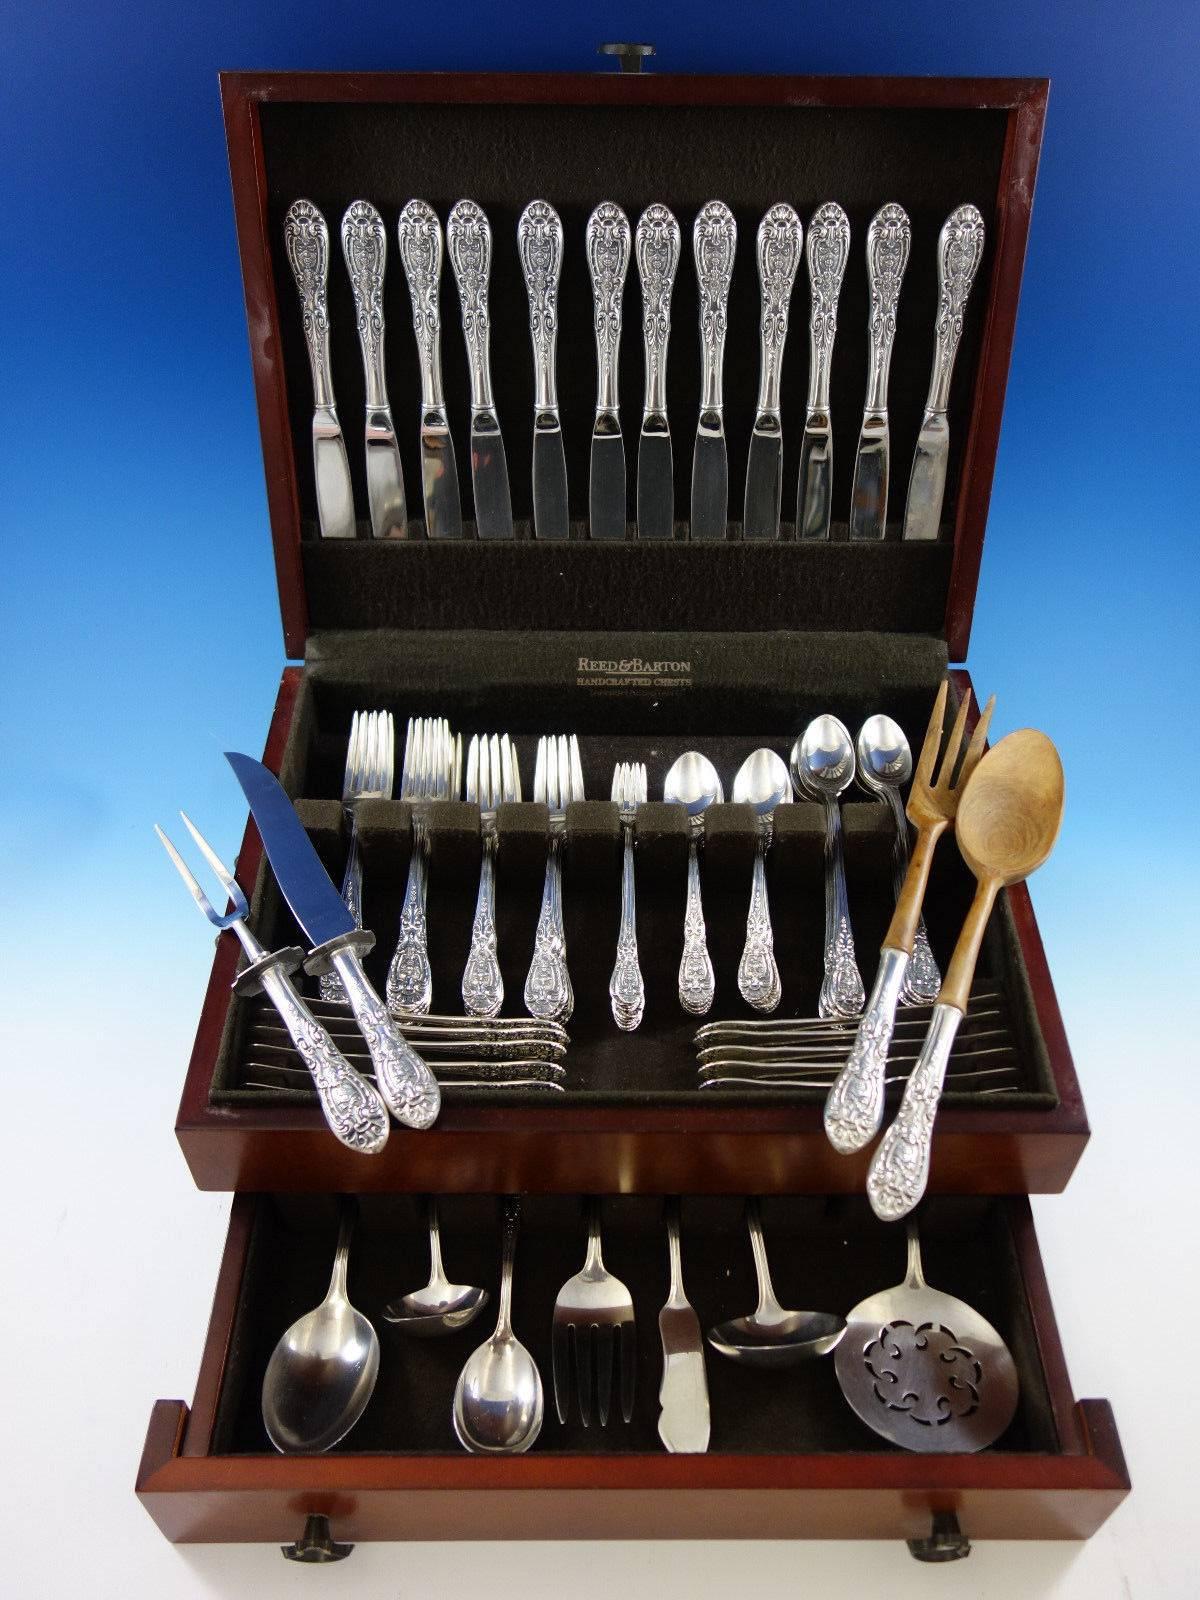 Southern Grandeur by Easterling sterling silver flatware set, 95 pieces. This set includes: 

12 knives, 9 1/4